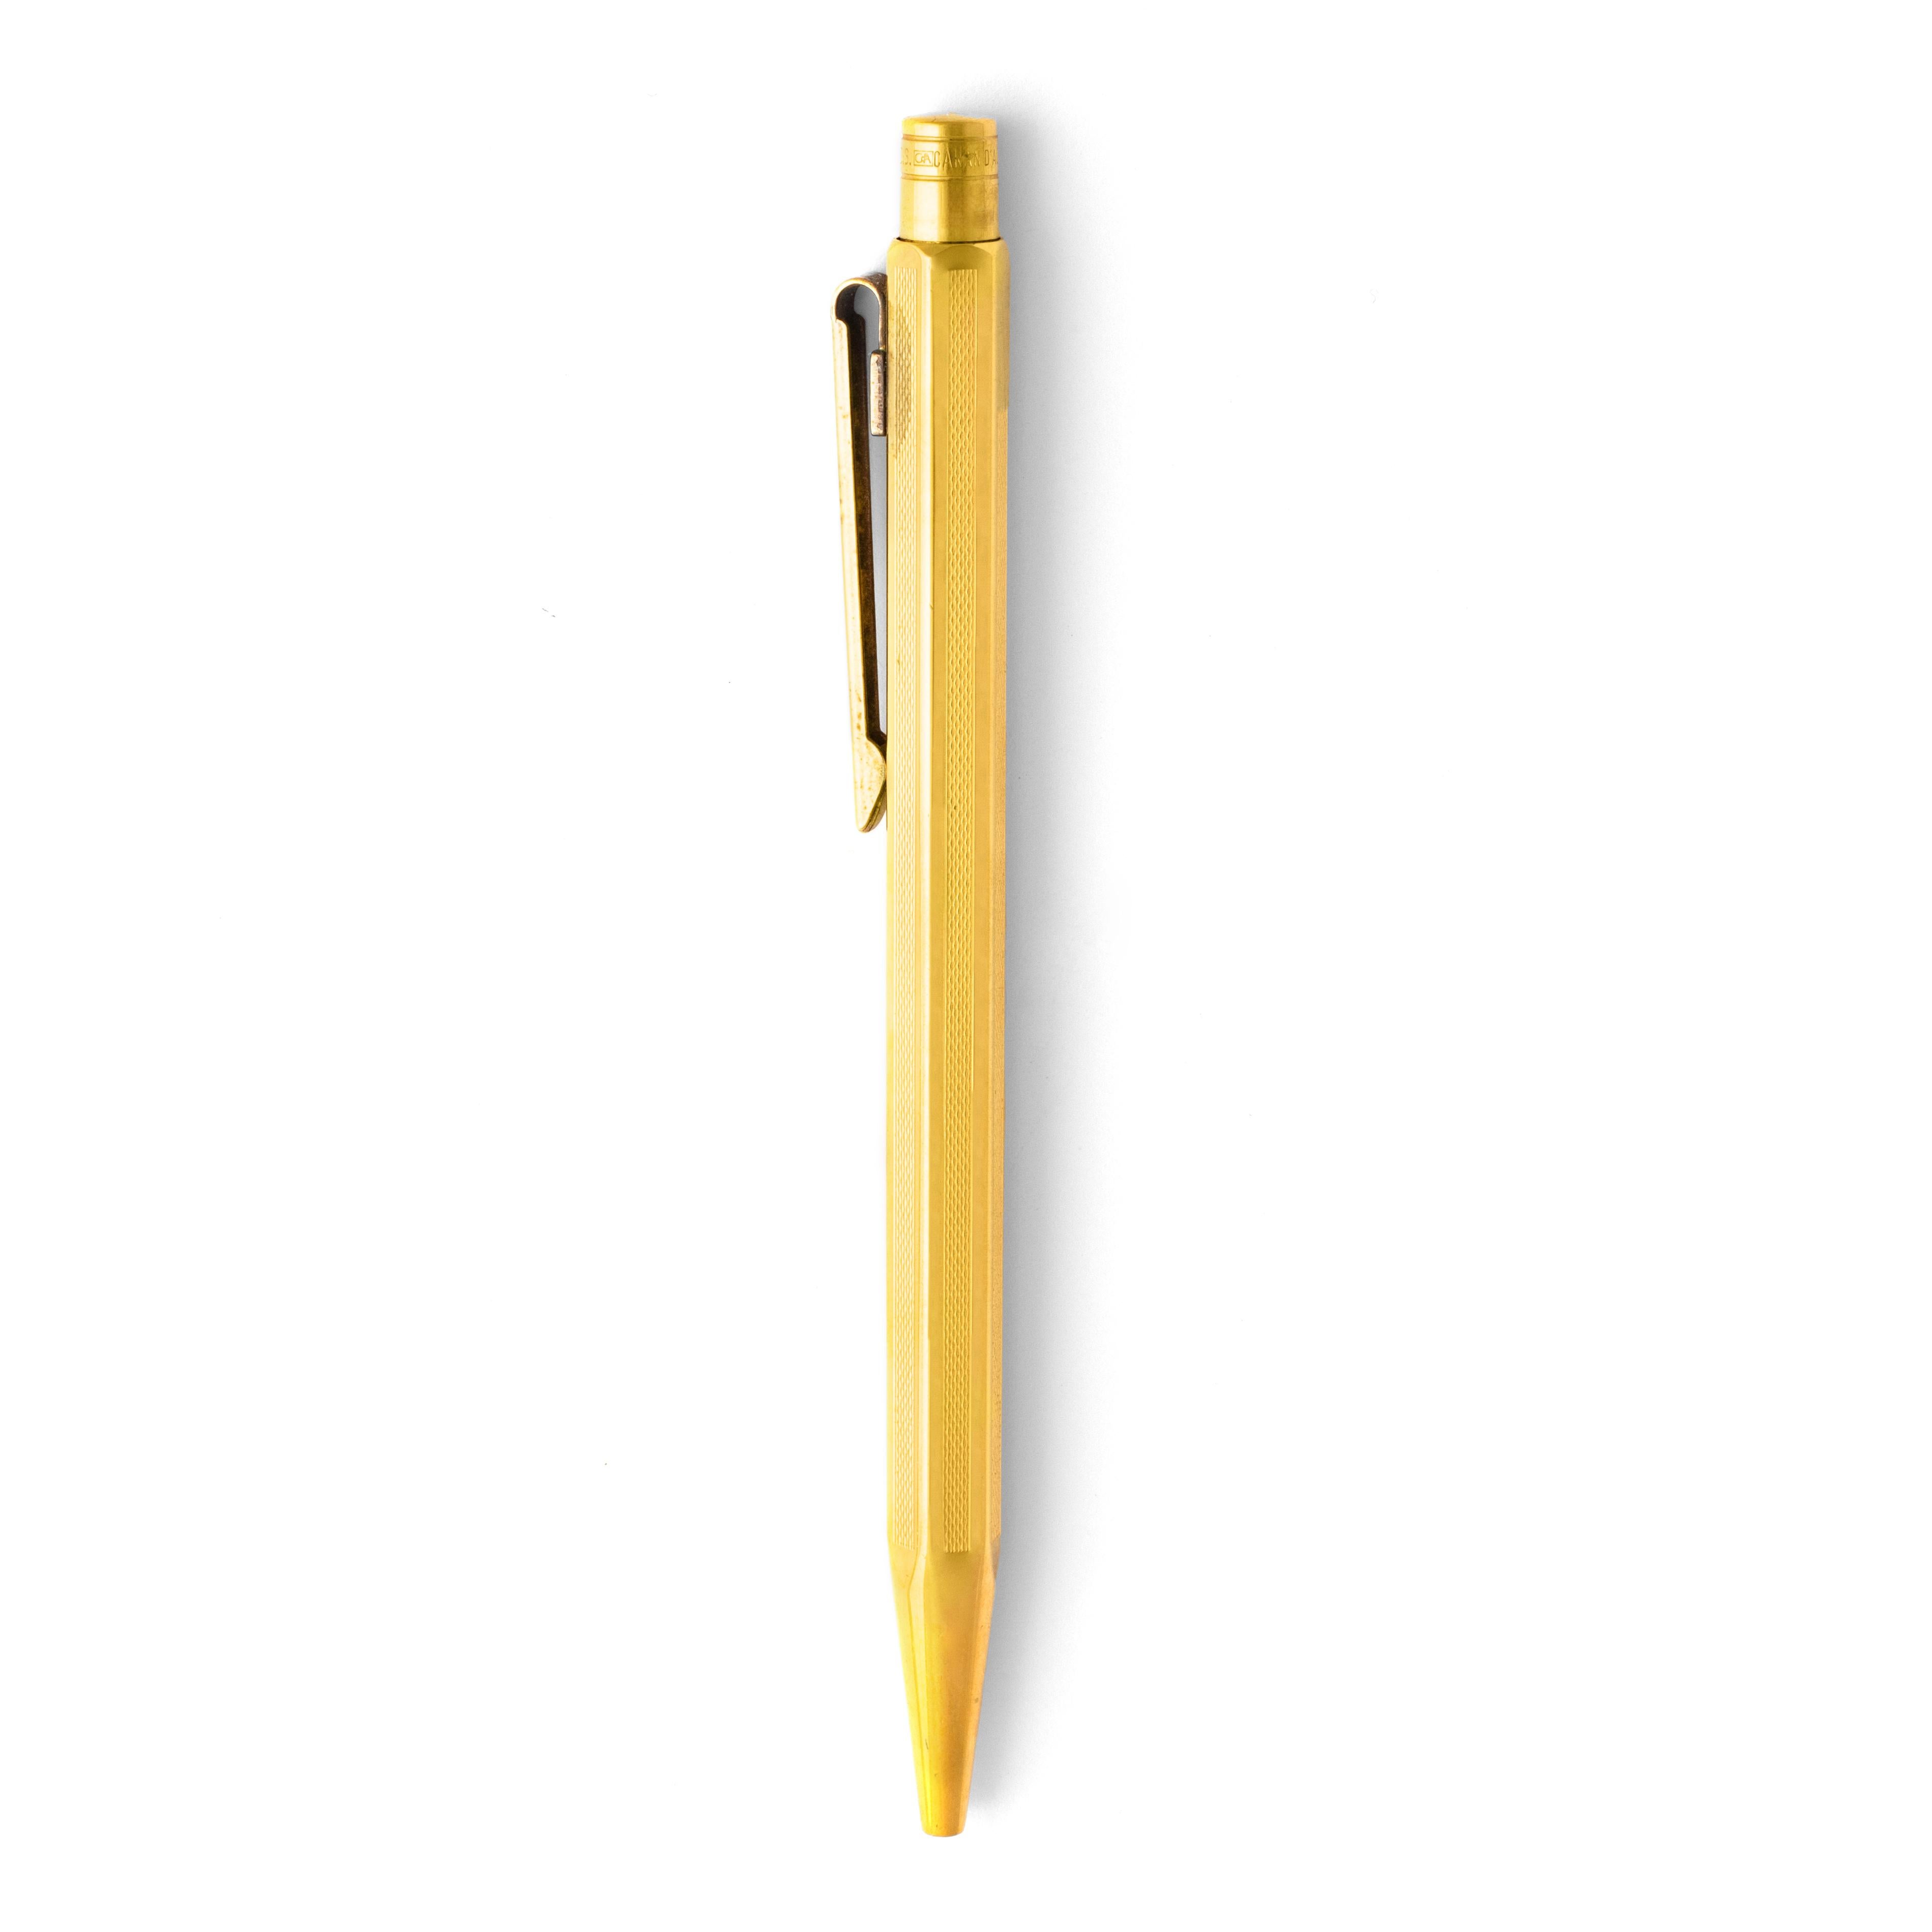 Caran d'Ache Gold plated BallPoint Pen.
Dimensions: 13.00 x 0.80 centimeters.

Sold as is. We do not guarantee the proper functioning of this pen.